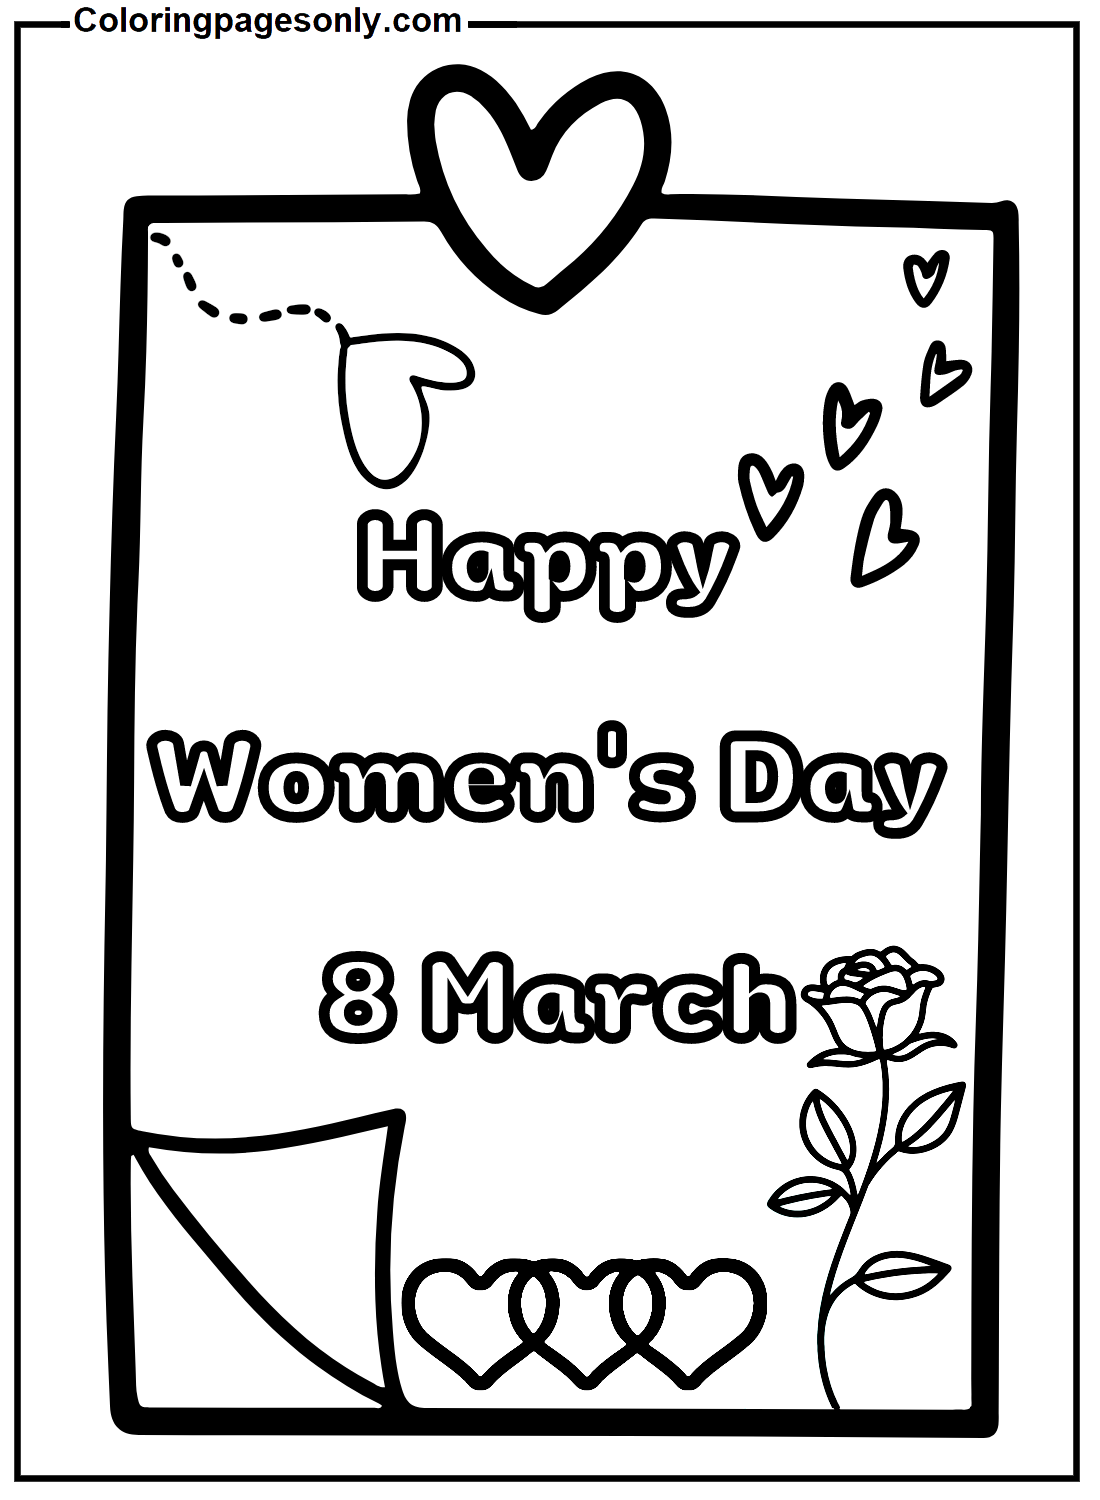 Happy Women’s Day 8 March Coloring Page